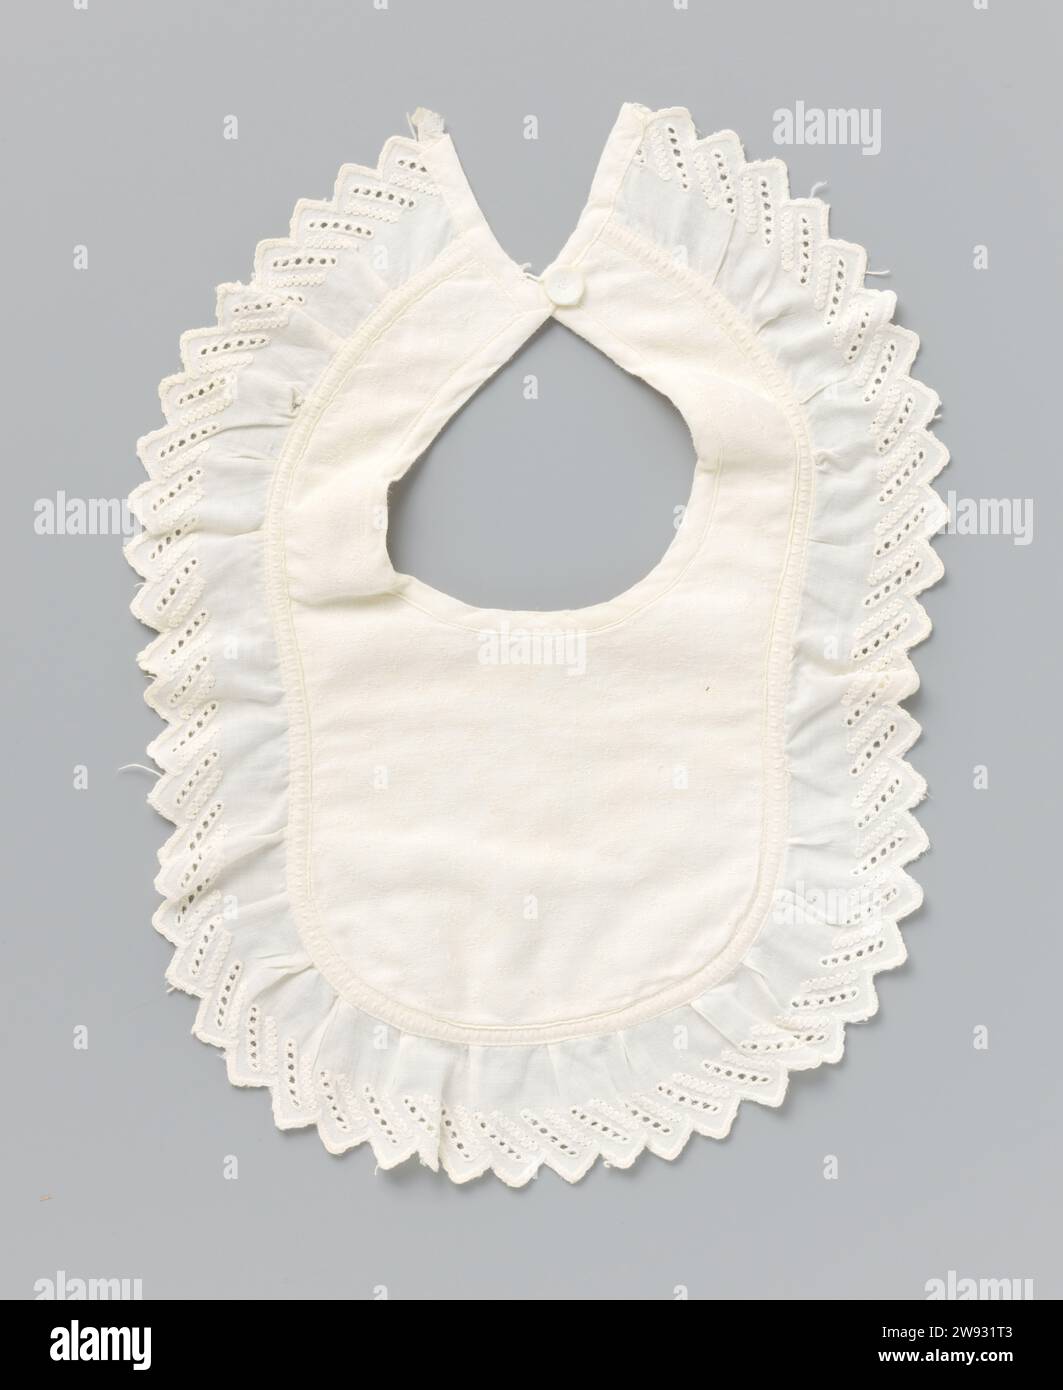 Slab of white cotton (?) With a bottom layer with woven vertical stripes and a top layer with woven crystal -shaped scattering motif with scalloped edge with English embroidery, anonymous  Slab made of white cotton (?) With a bottom layer with woven vertical stripes and a top layer with woven crystal -shaped spreading motif with scalloped edge with English embroidery.  cotton (textile) embroidering Stock Photo